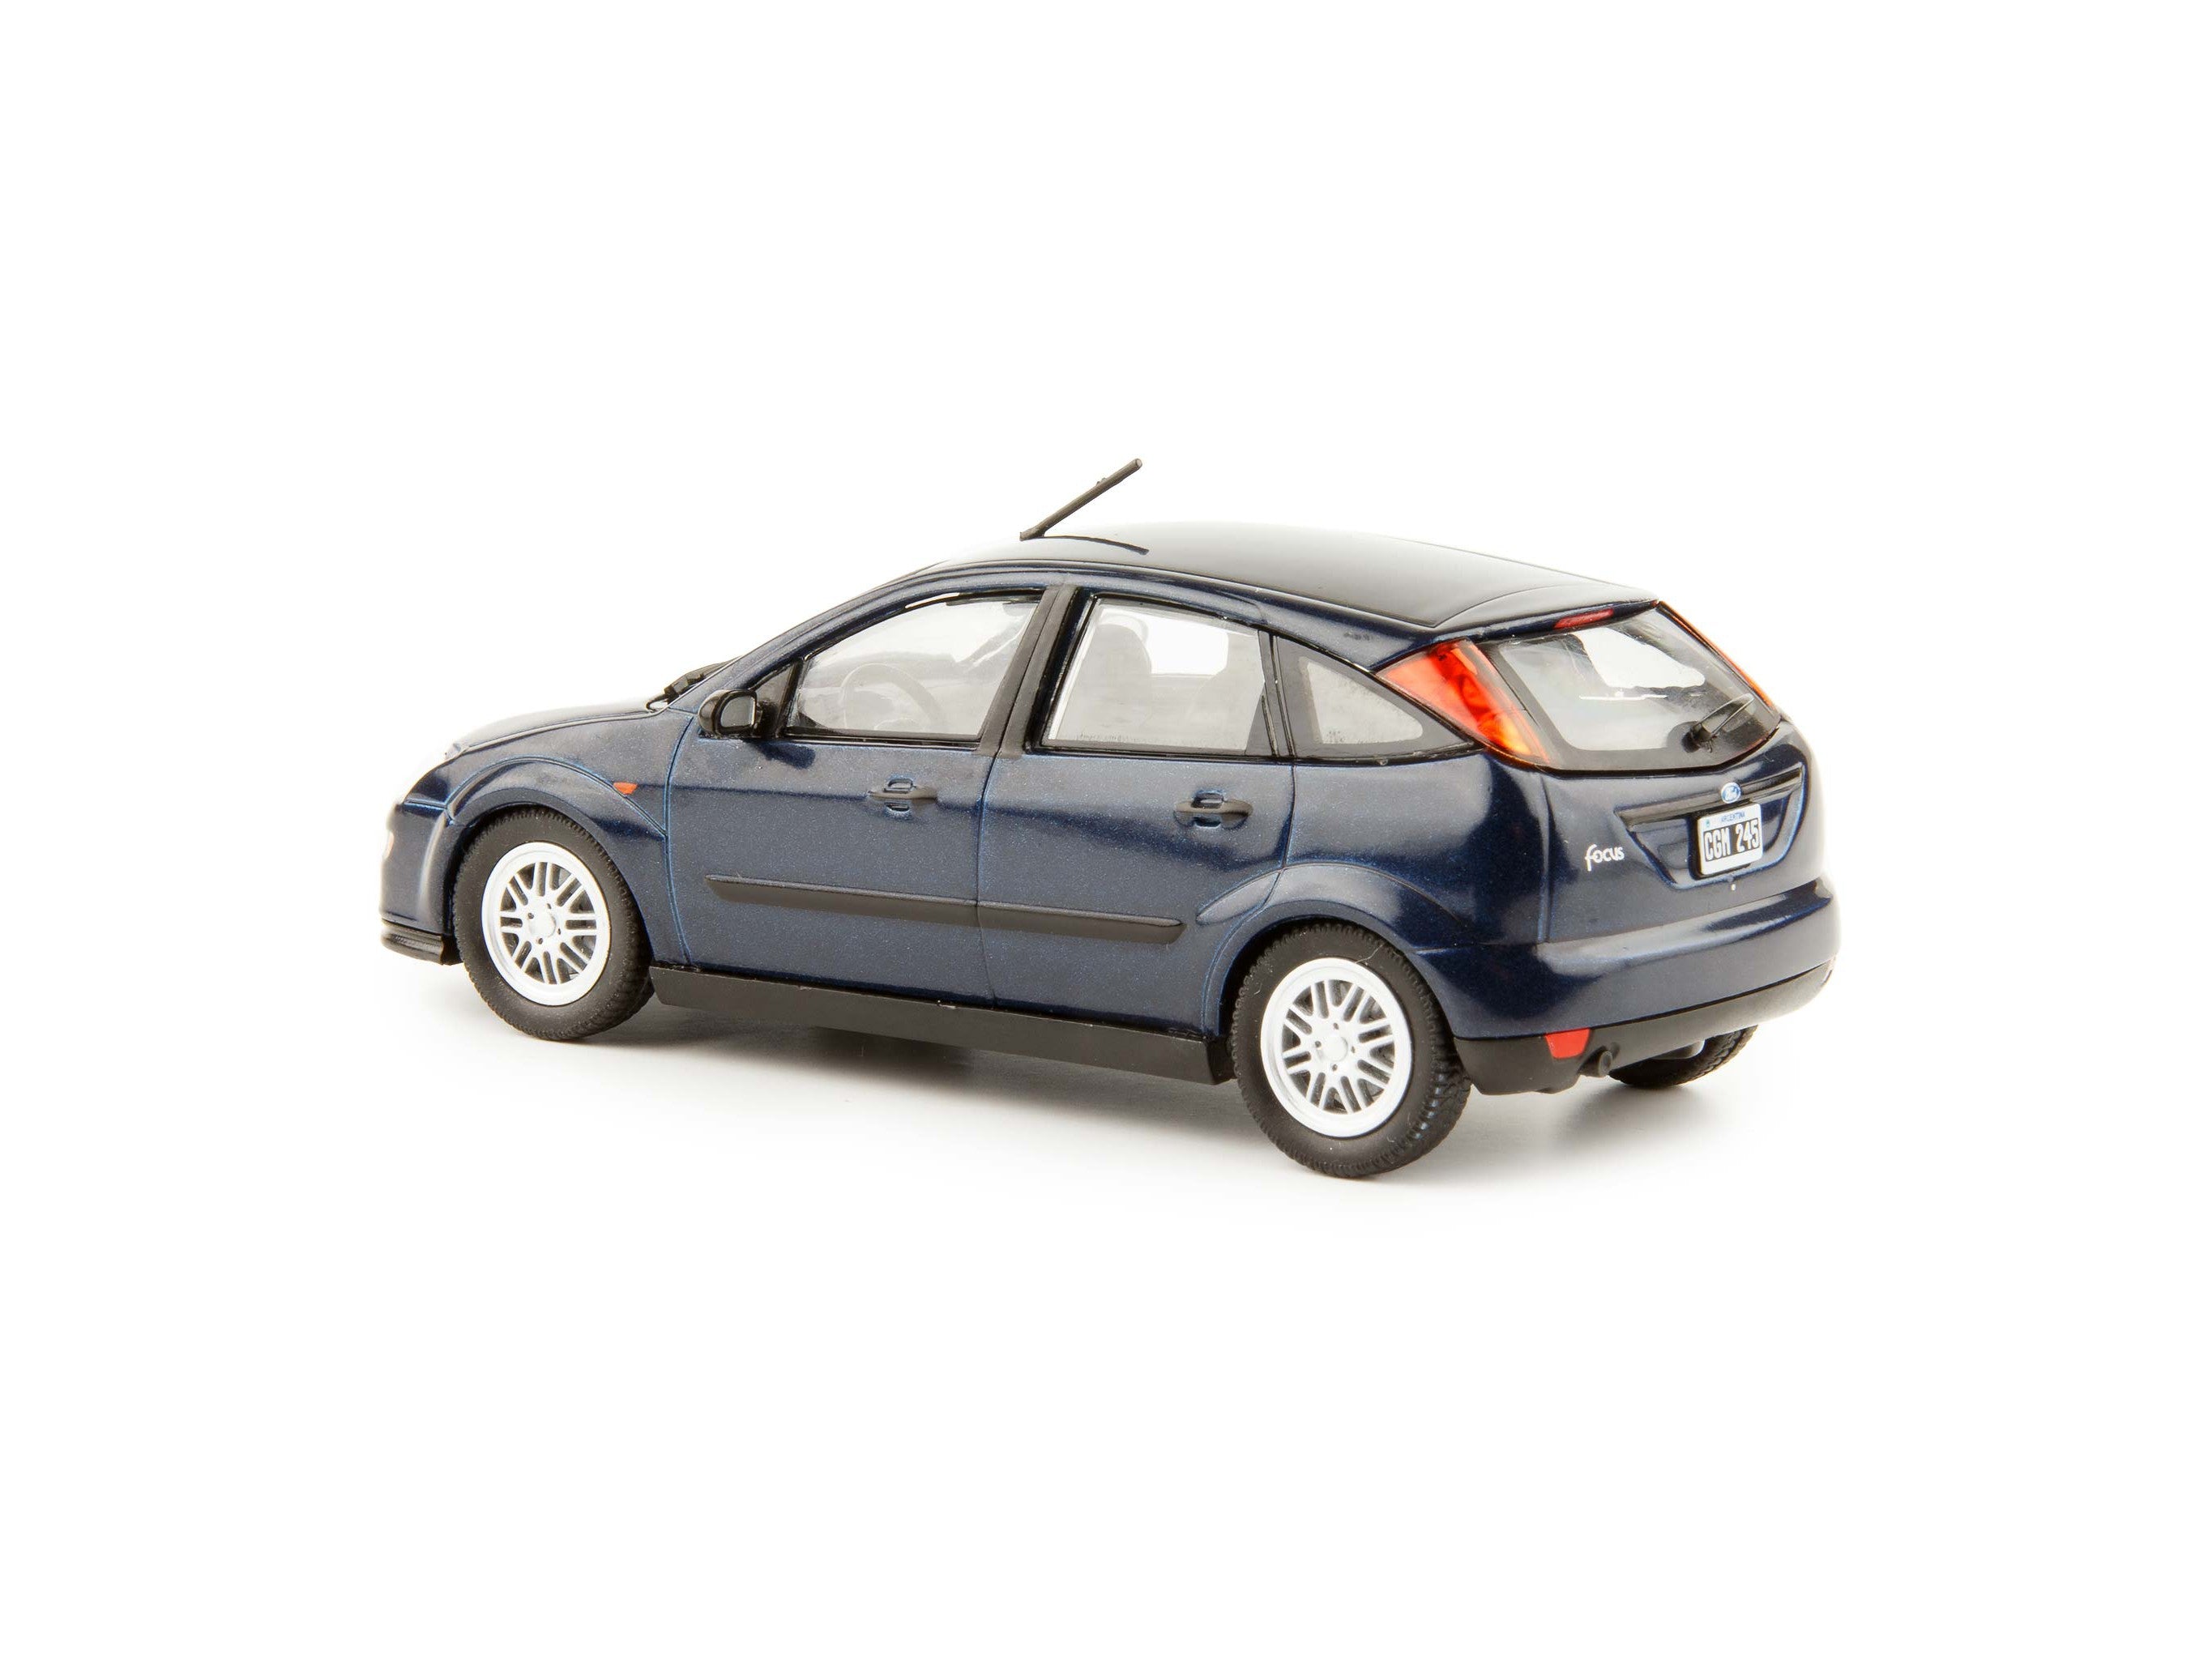 Ford Focus 1998 blue- 1:43 Scale Diecast Model Car-Unbranded-Diecast Model Centre